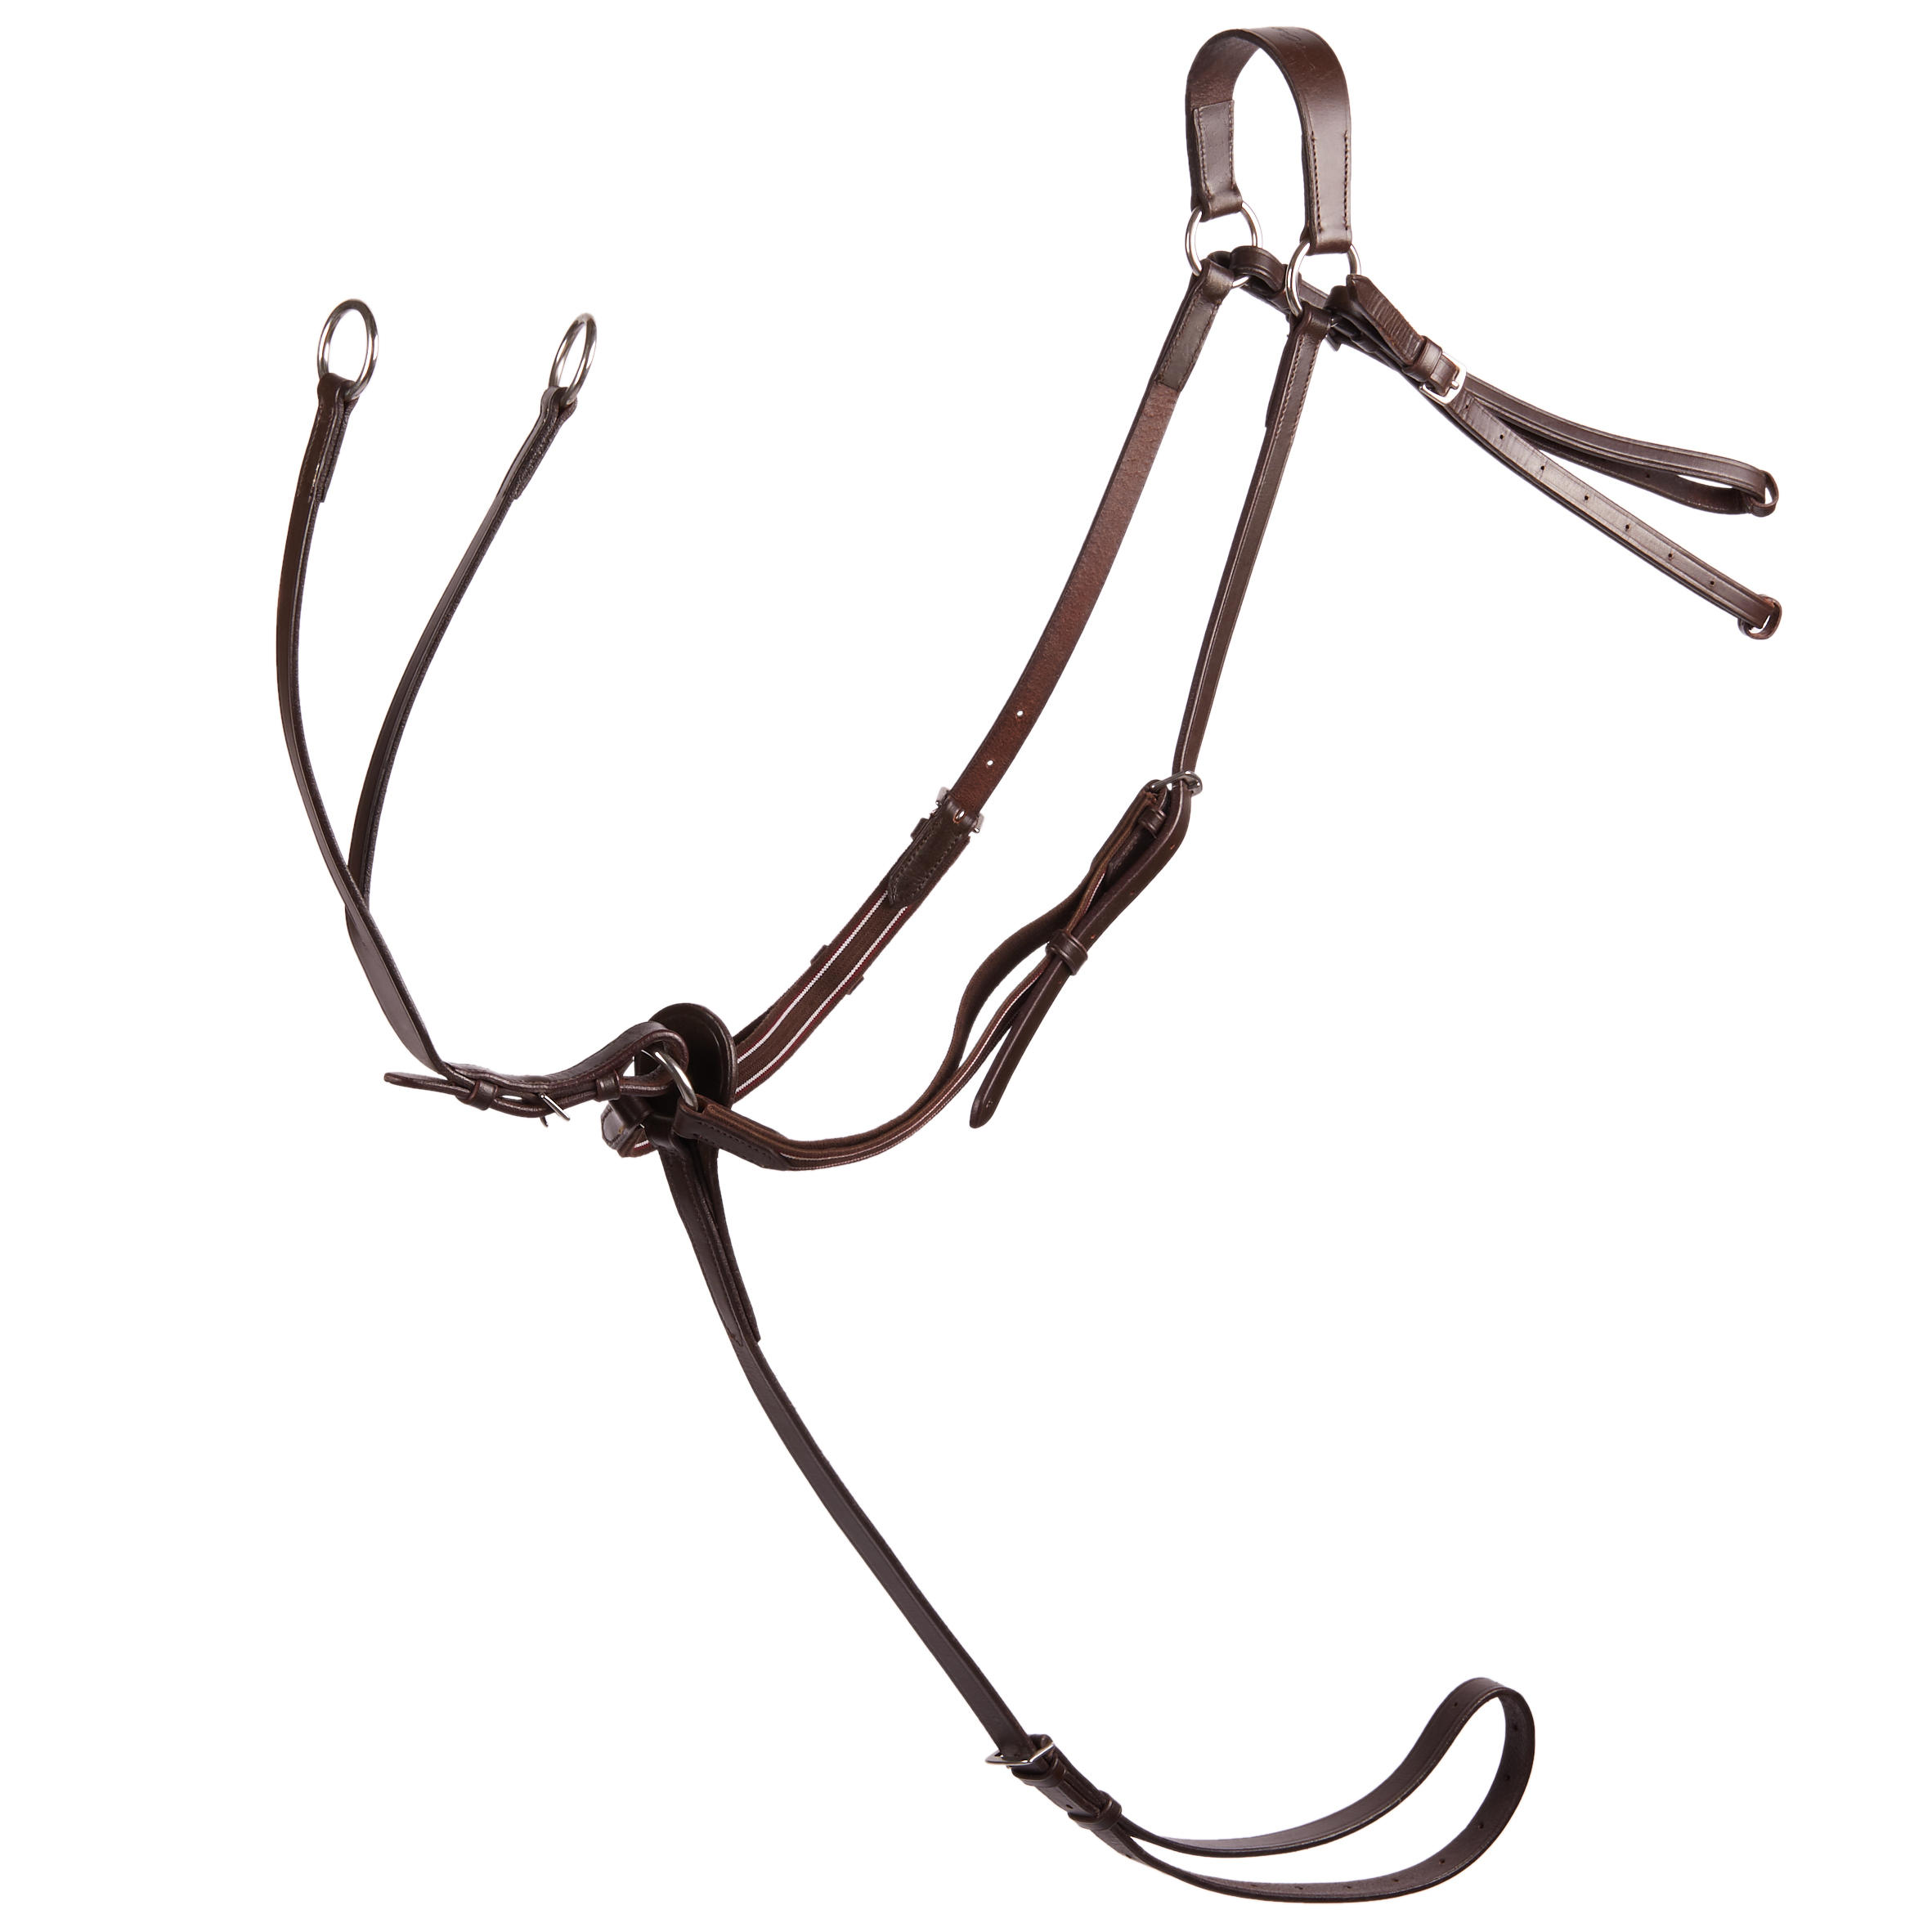 FOUGANZA Schooling Horse Riding Breastplate + Martingale For Horse - Brown